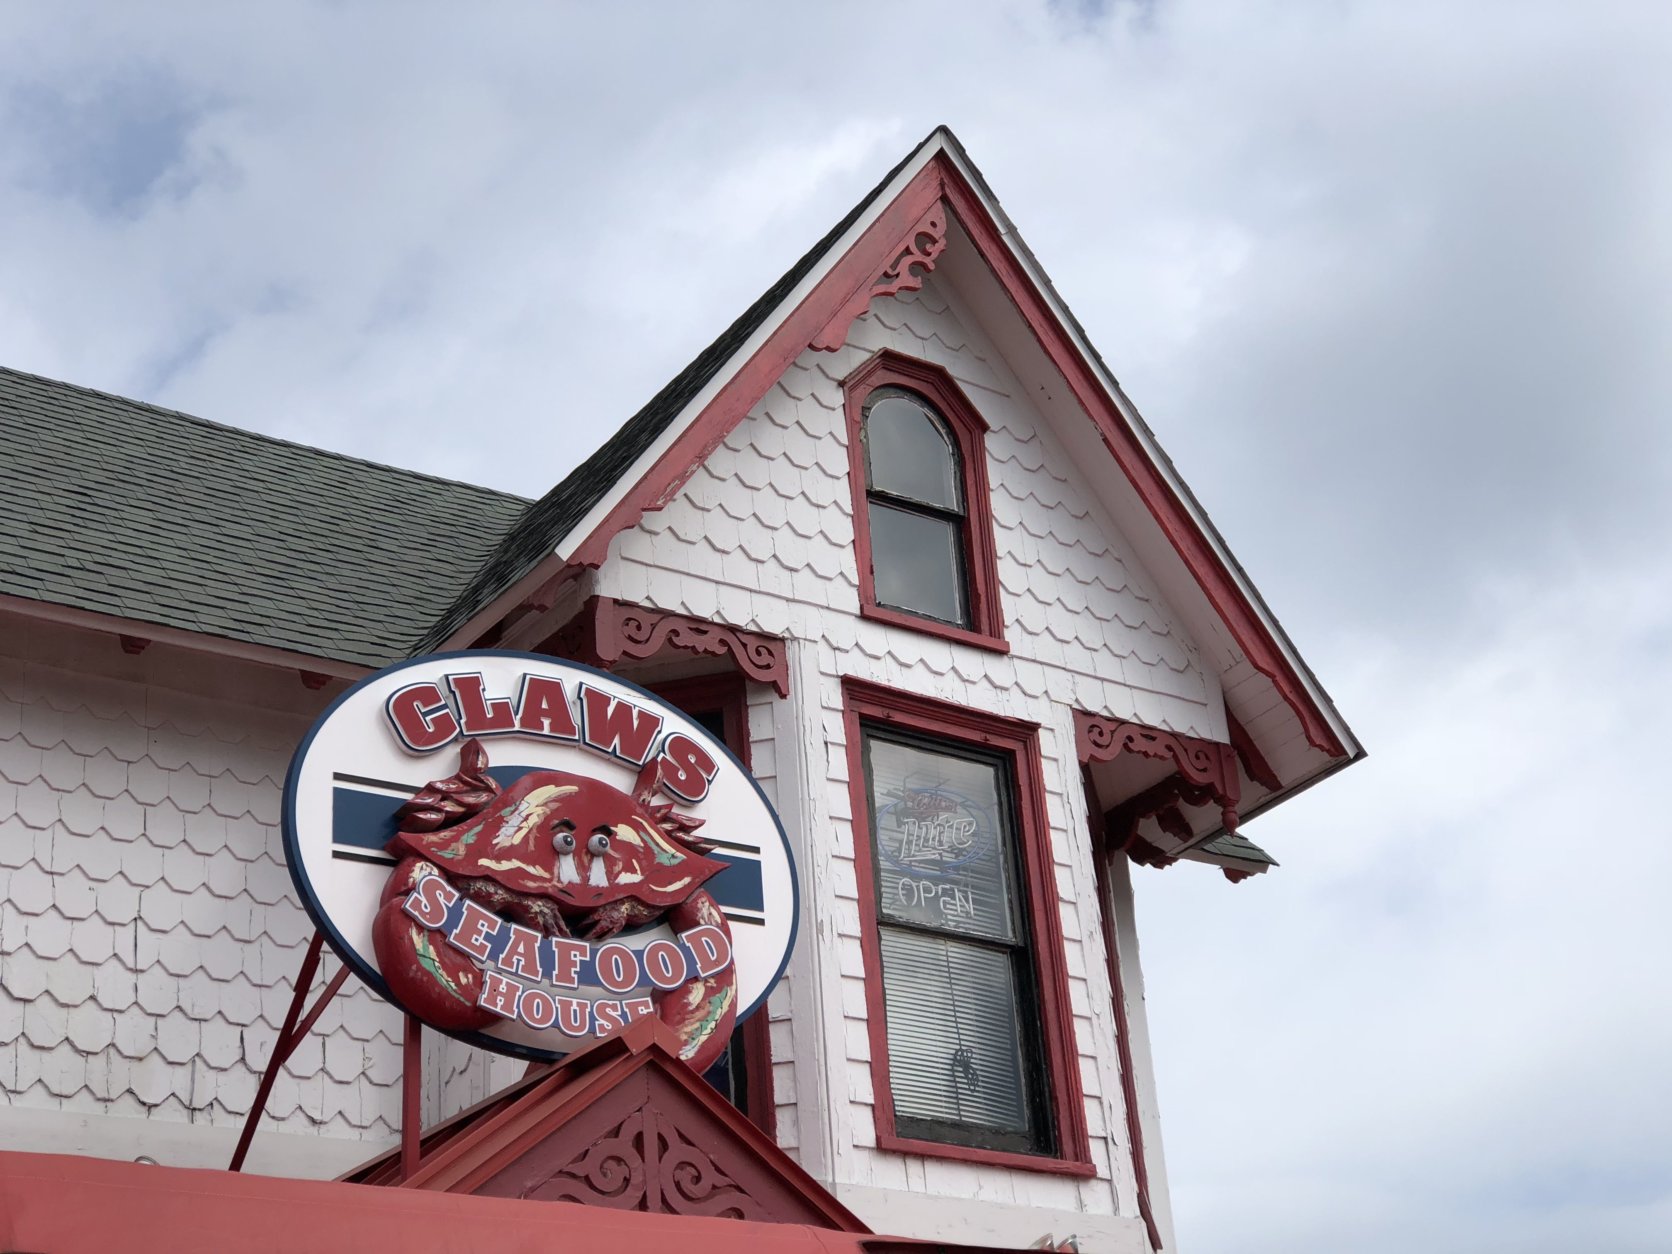 This land-and-sea restaurant has everything from crab dip to a fried seafood feast on its menu, and local beer pours from the taps. (WTOP/Kate Ryan) 